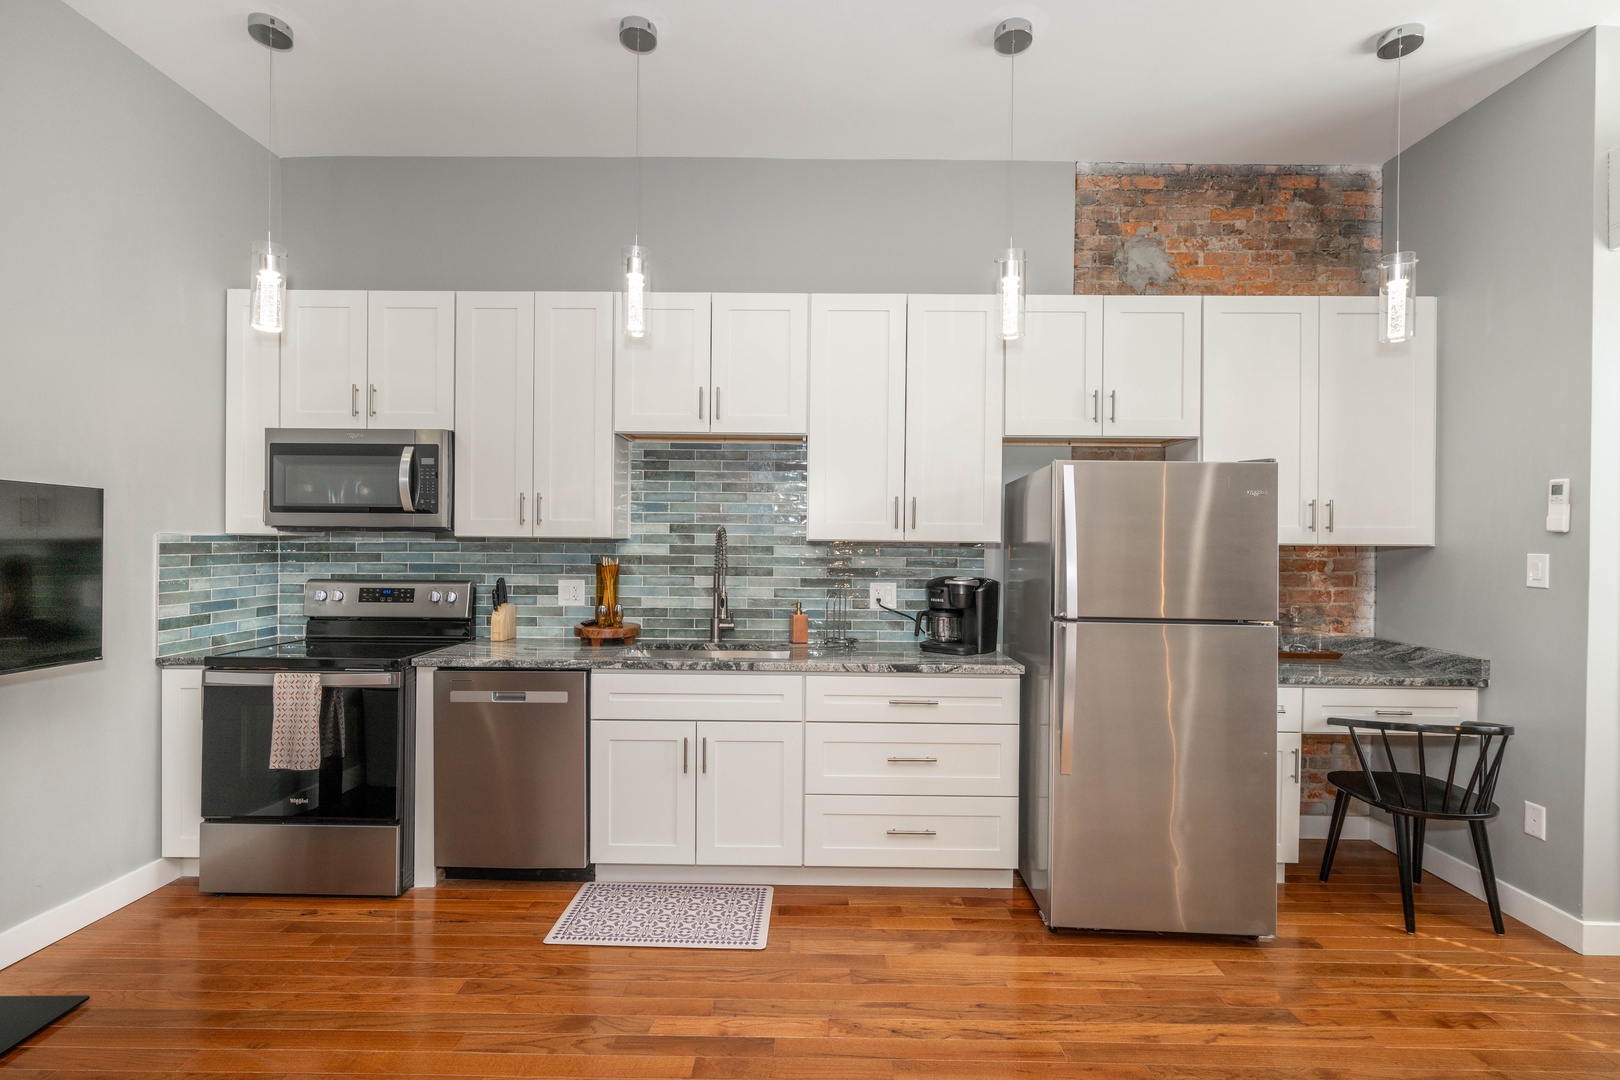 The sophisticated kitchen offers ample space & every home comfort